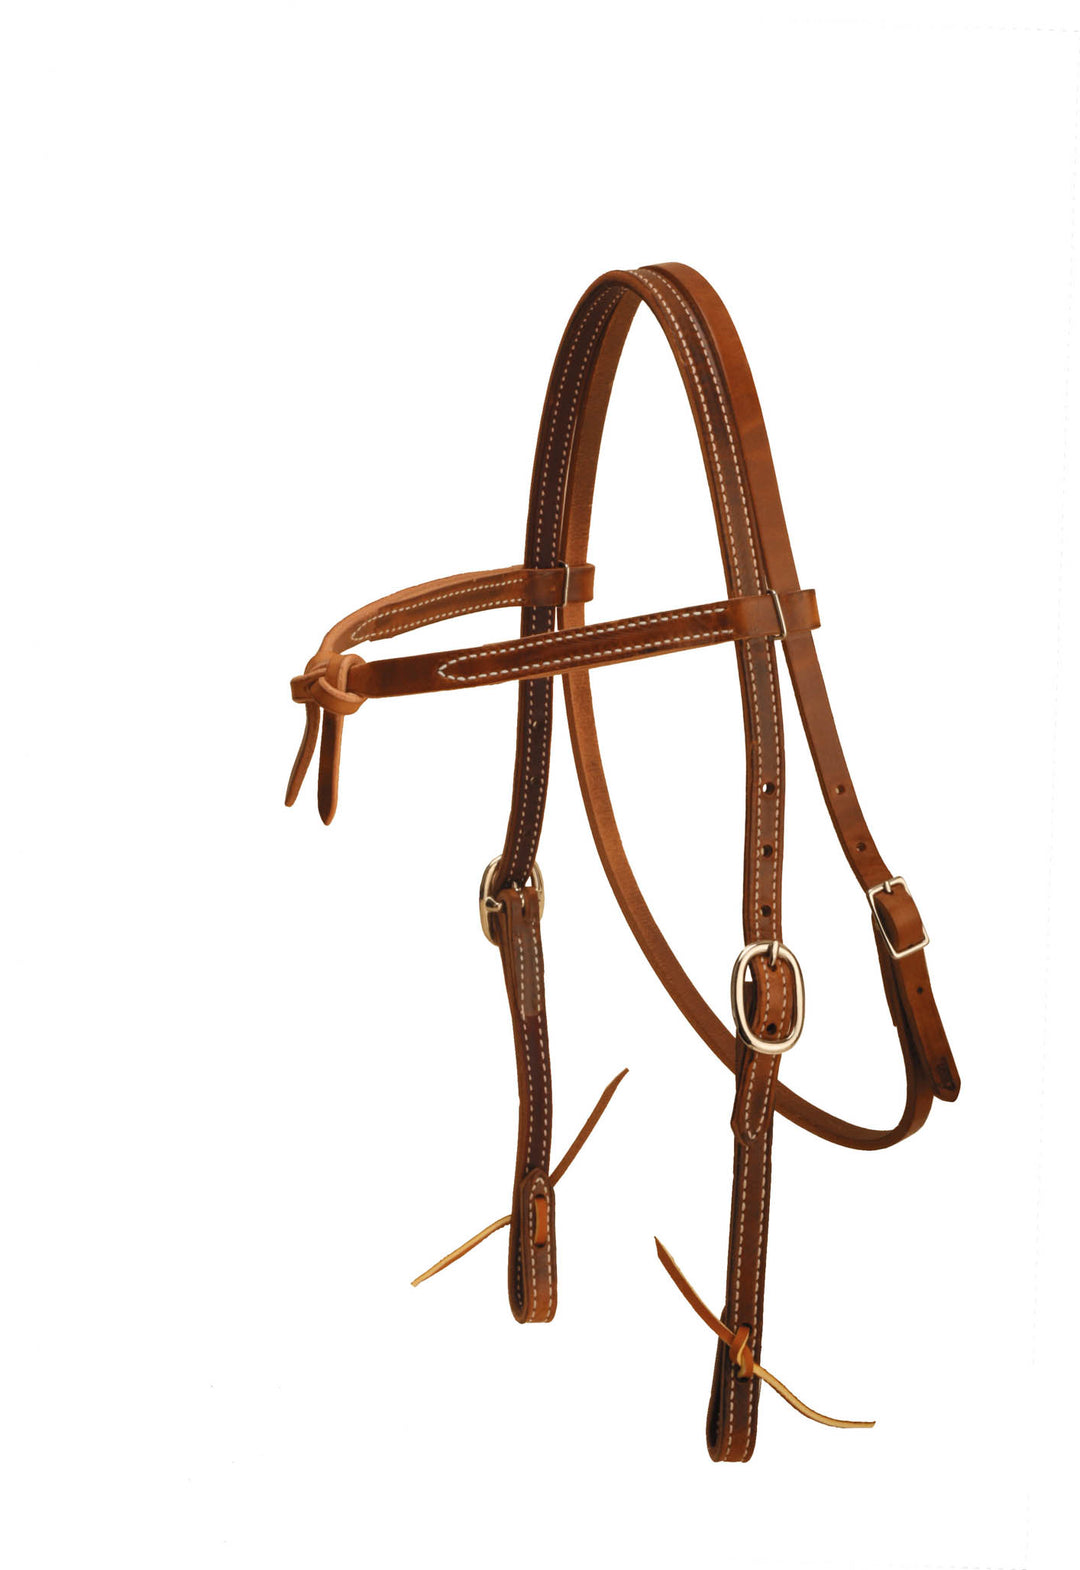 Tory Leather Harness Leather Knotted Browband Headstall